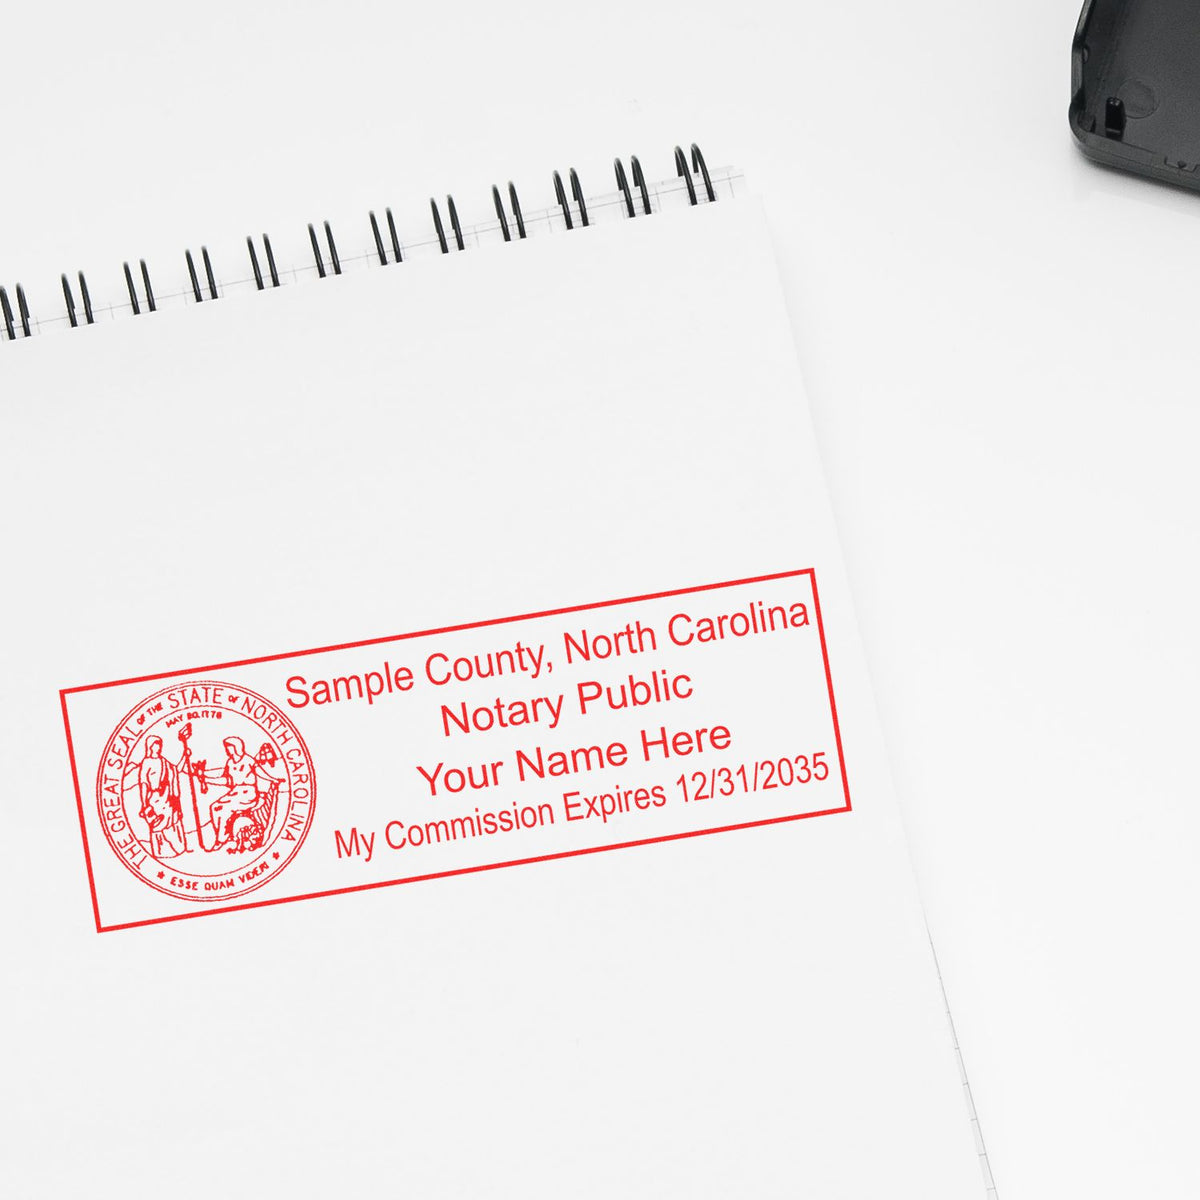 An alternative view of the Slim Pre-Inked State Seal Notary Stamp for North Carolina stamped on a sheet of paper showing the image in use